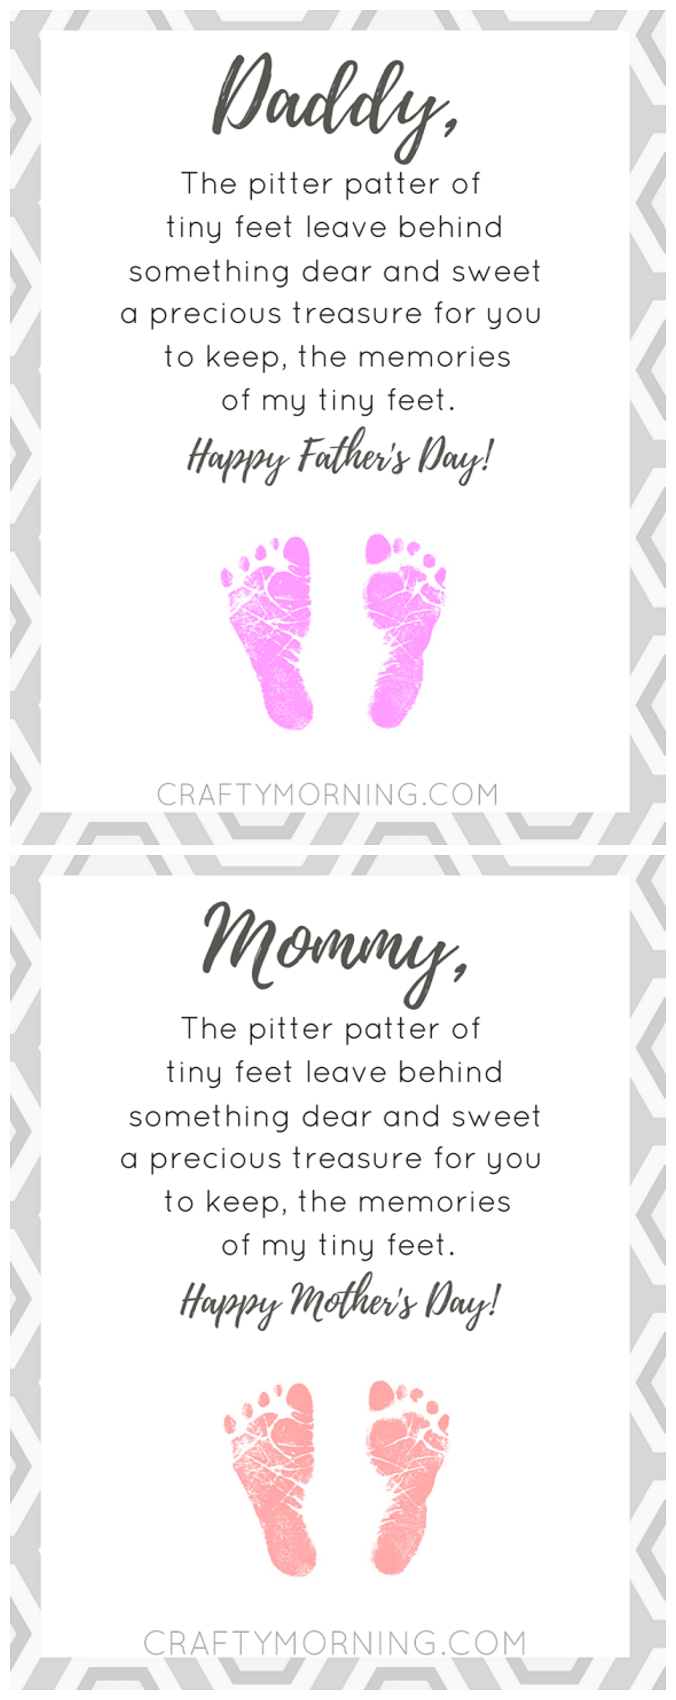 Free Pitter Patter Of Tiny Feet Poem Printable For Mom Or Dad - Free Printable Fathers Day Poems For Preschoolers